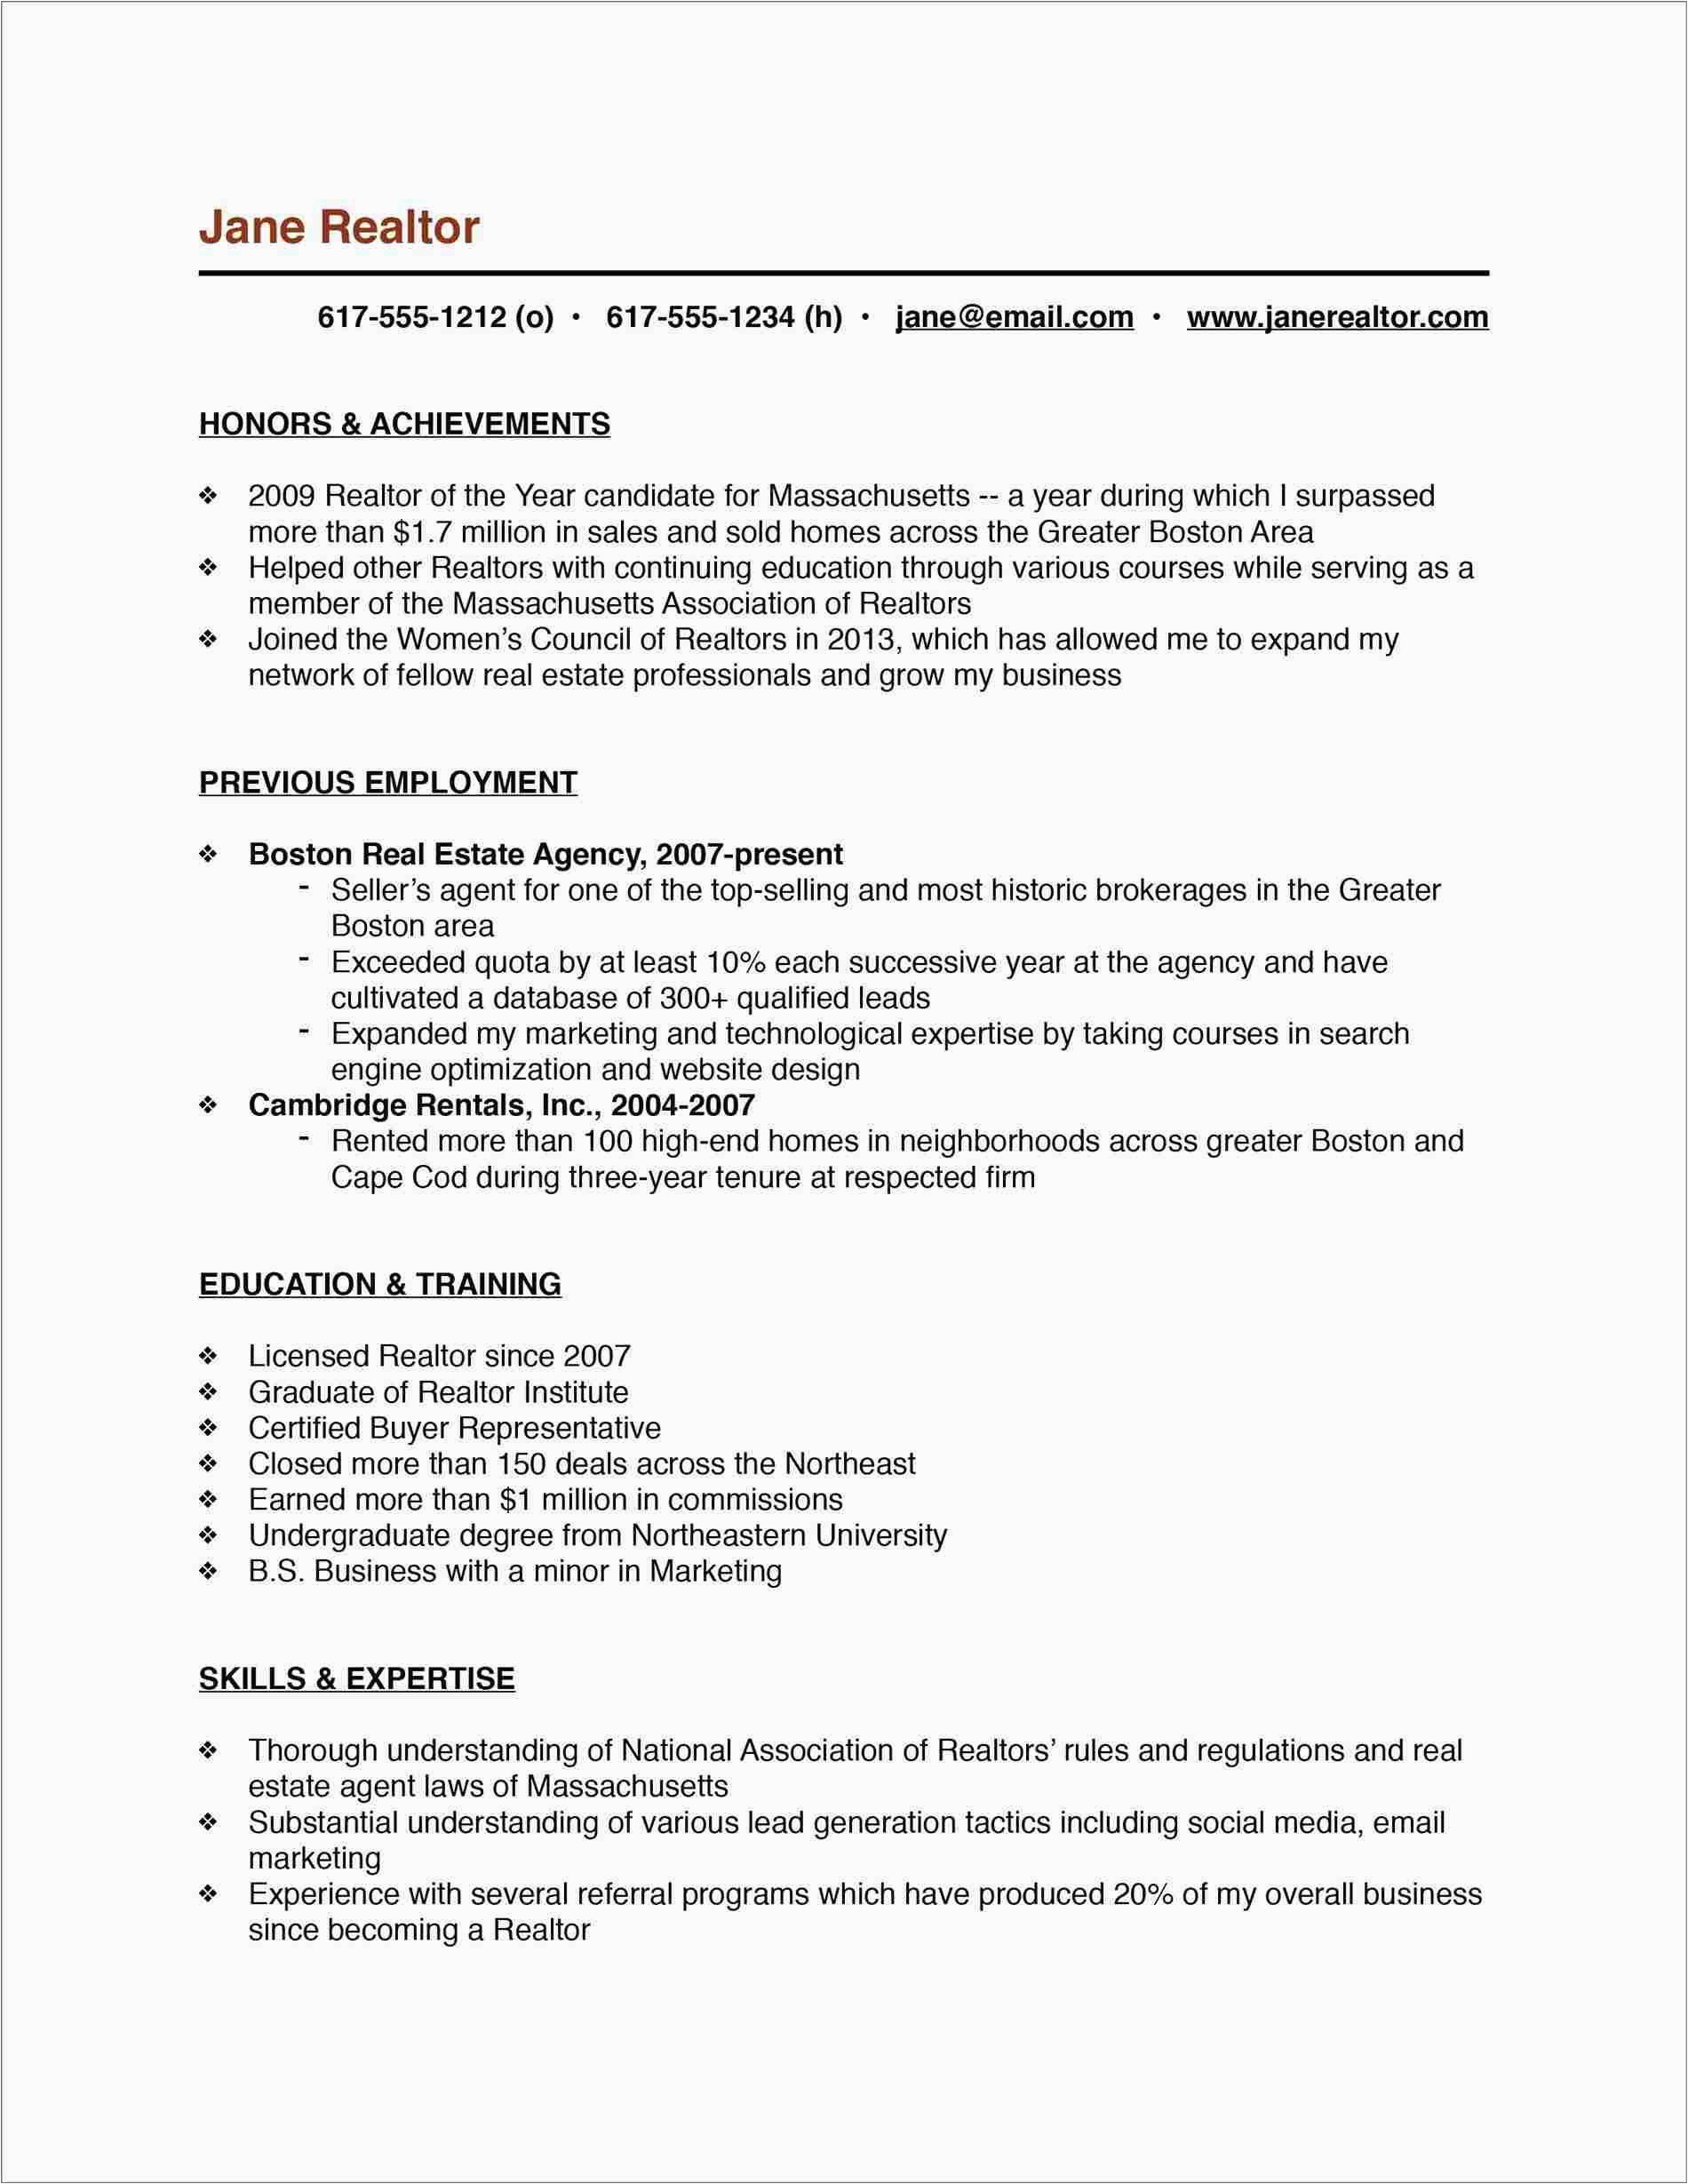 Resume Samples for 18 Year Olds Resume Examples 18 Year Old Resume Templates